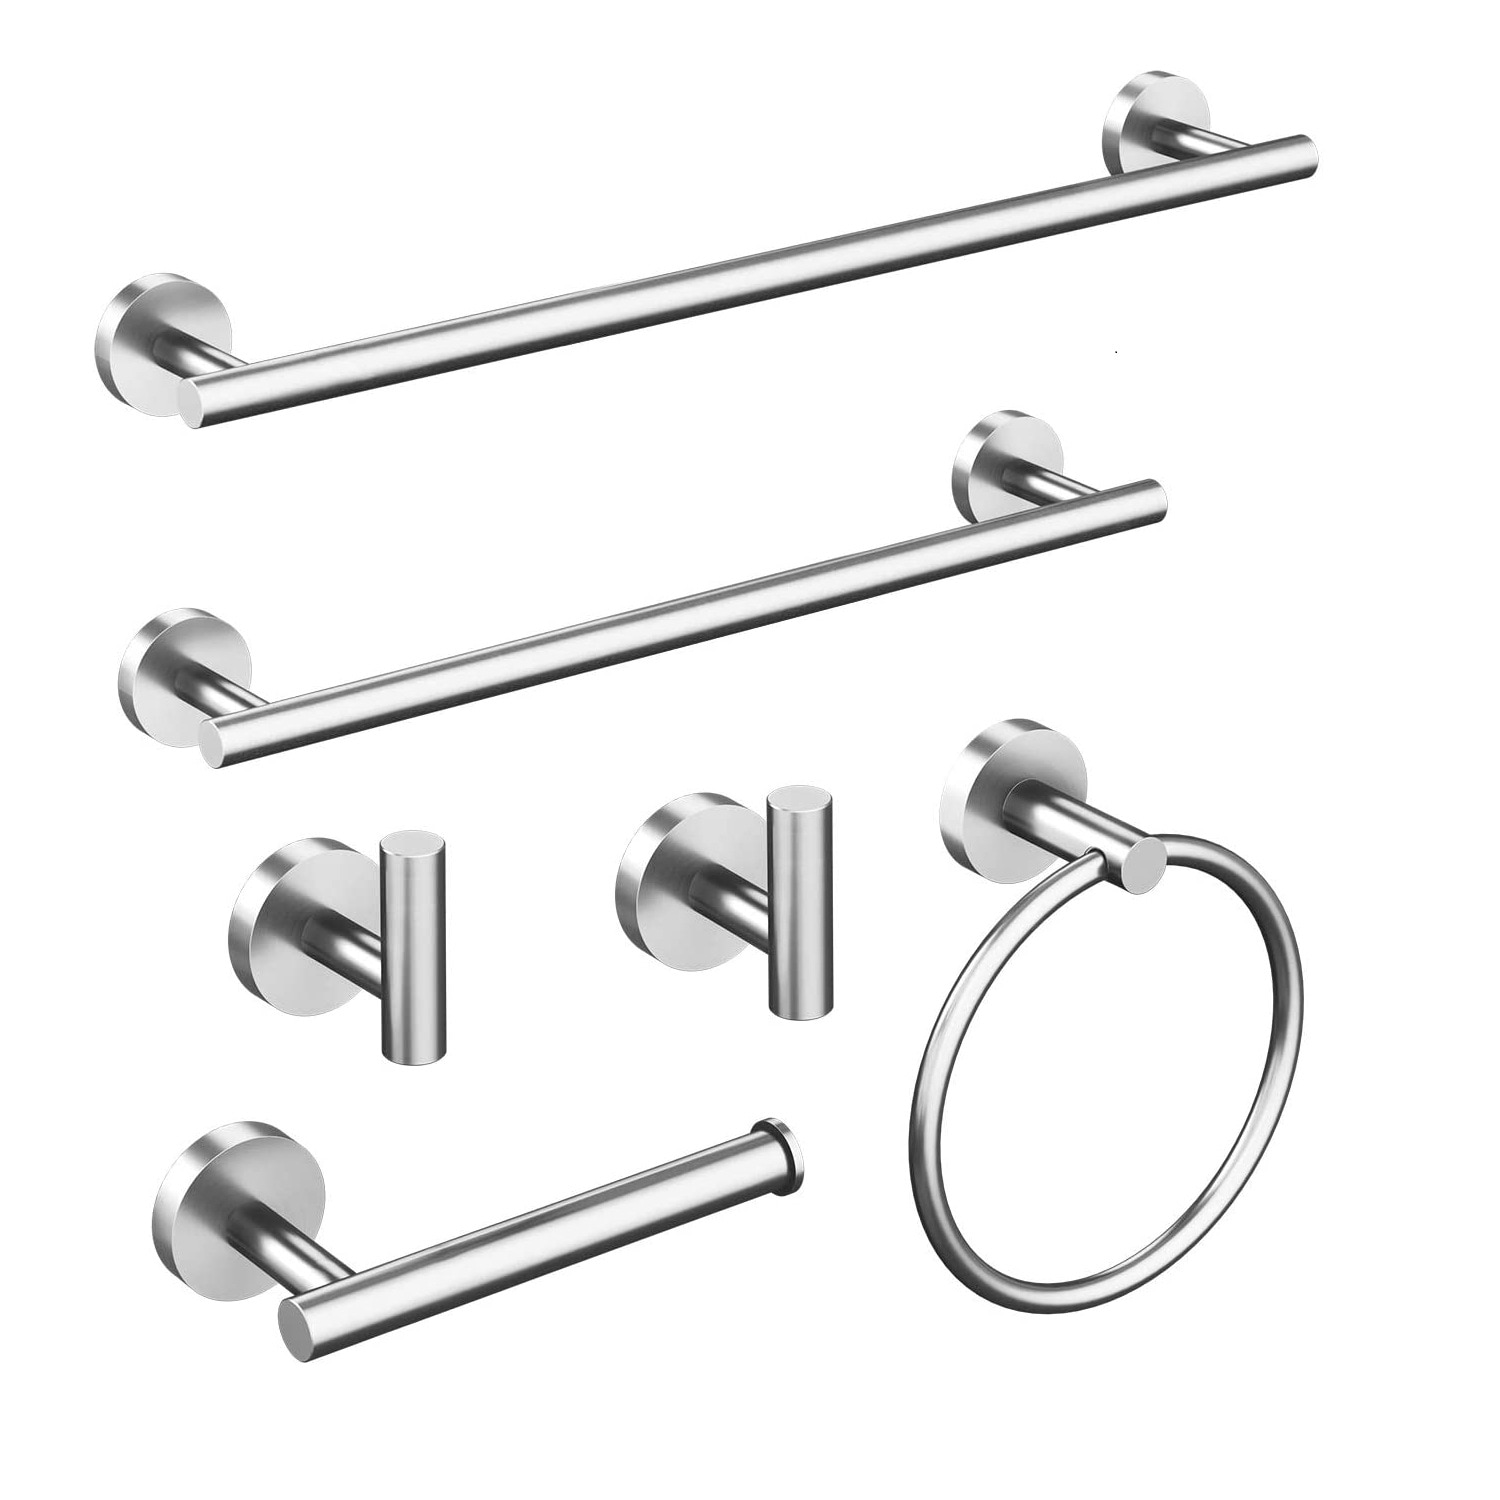 https://ak1.ostkcdn.com/images/products/is/images/direct/f42ebe78ef39f11f90796079402180dd94f1454d/Interbath-6-Piece-Stainless-Steel-Bathroom-Towel-Rack-Set-Wall-Mount.jpg